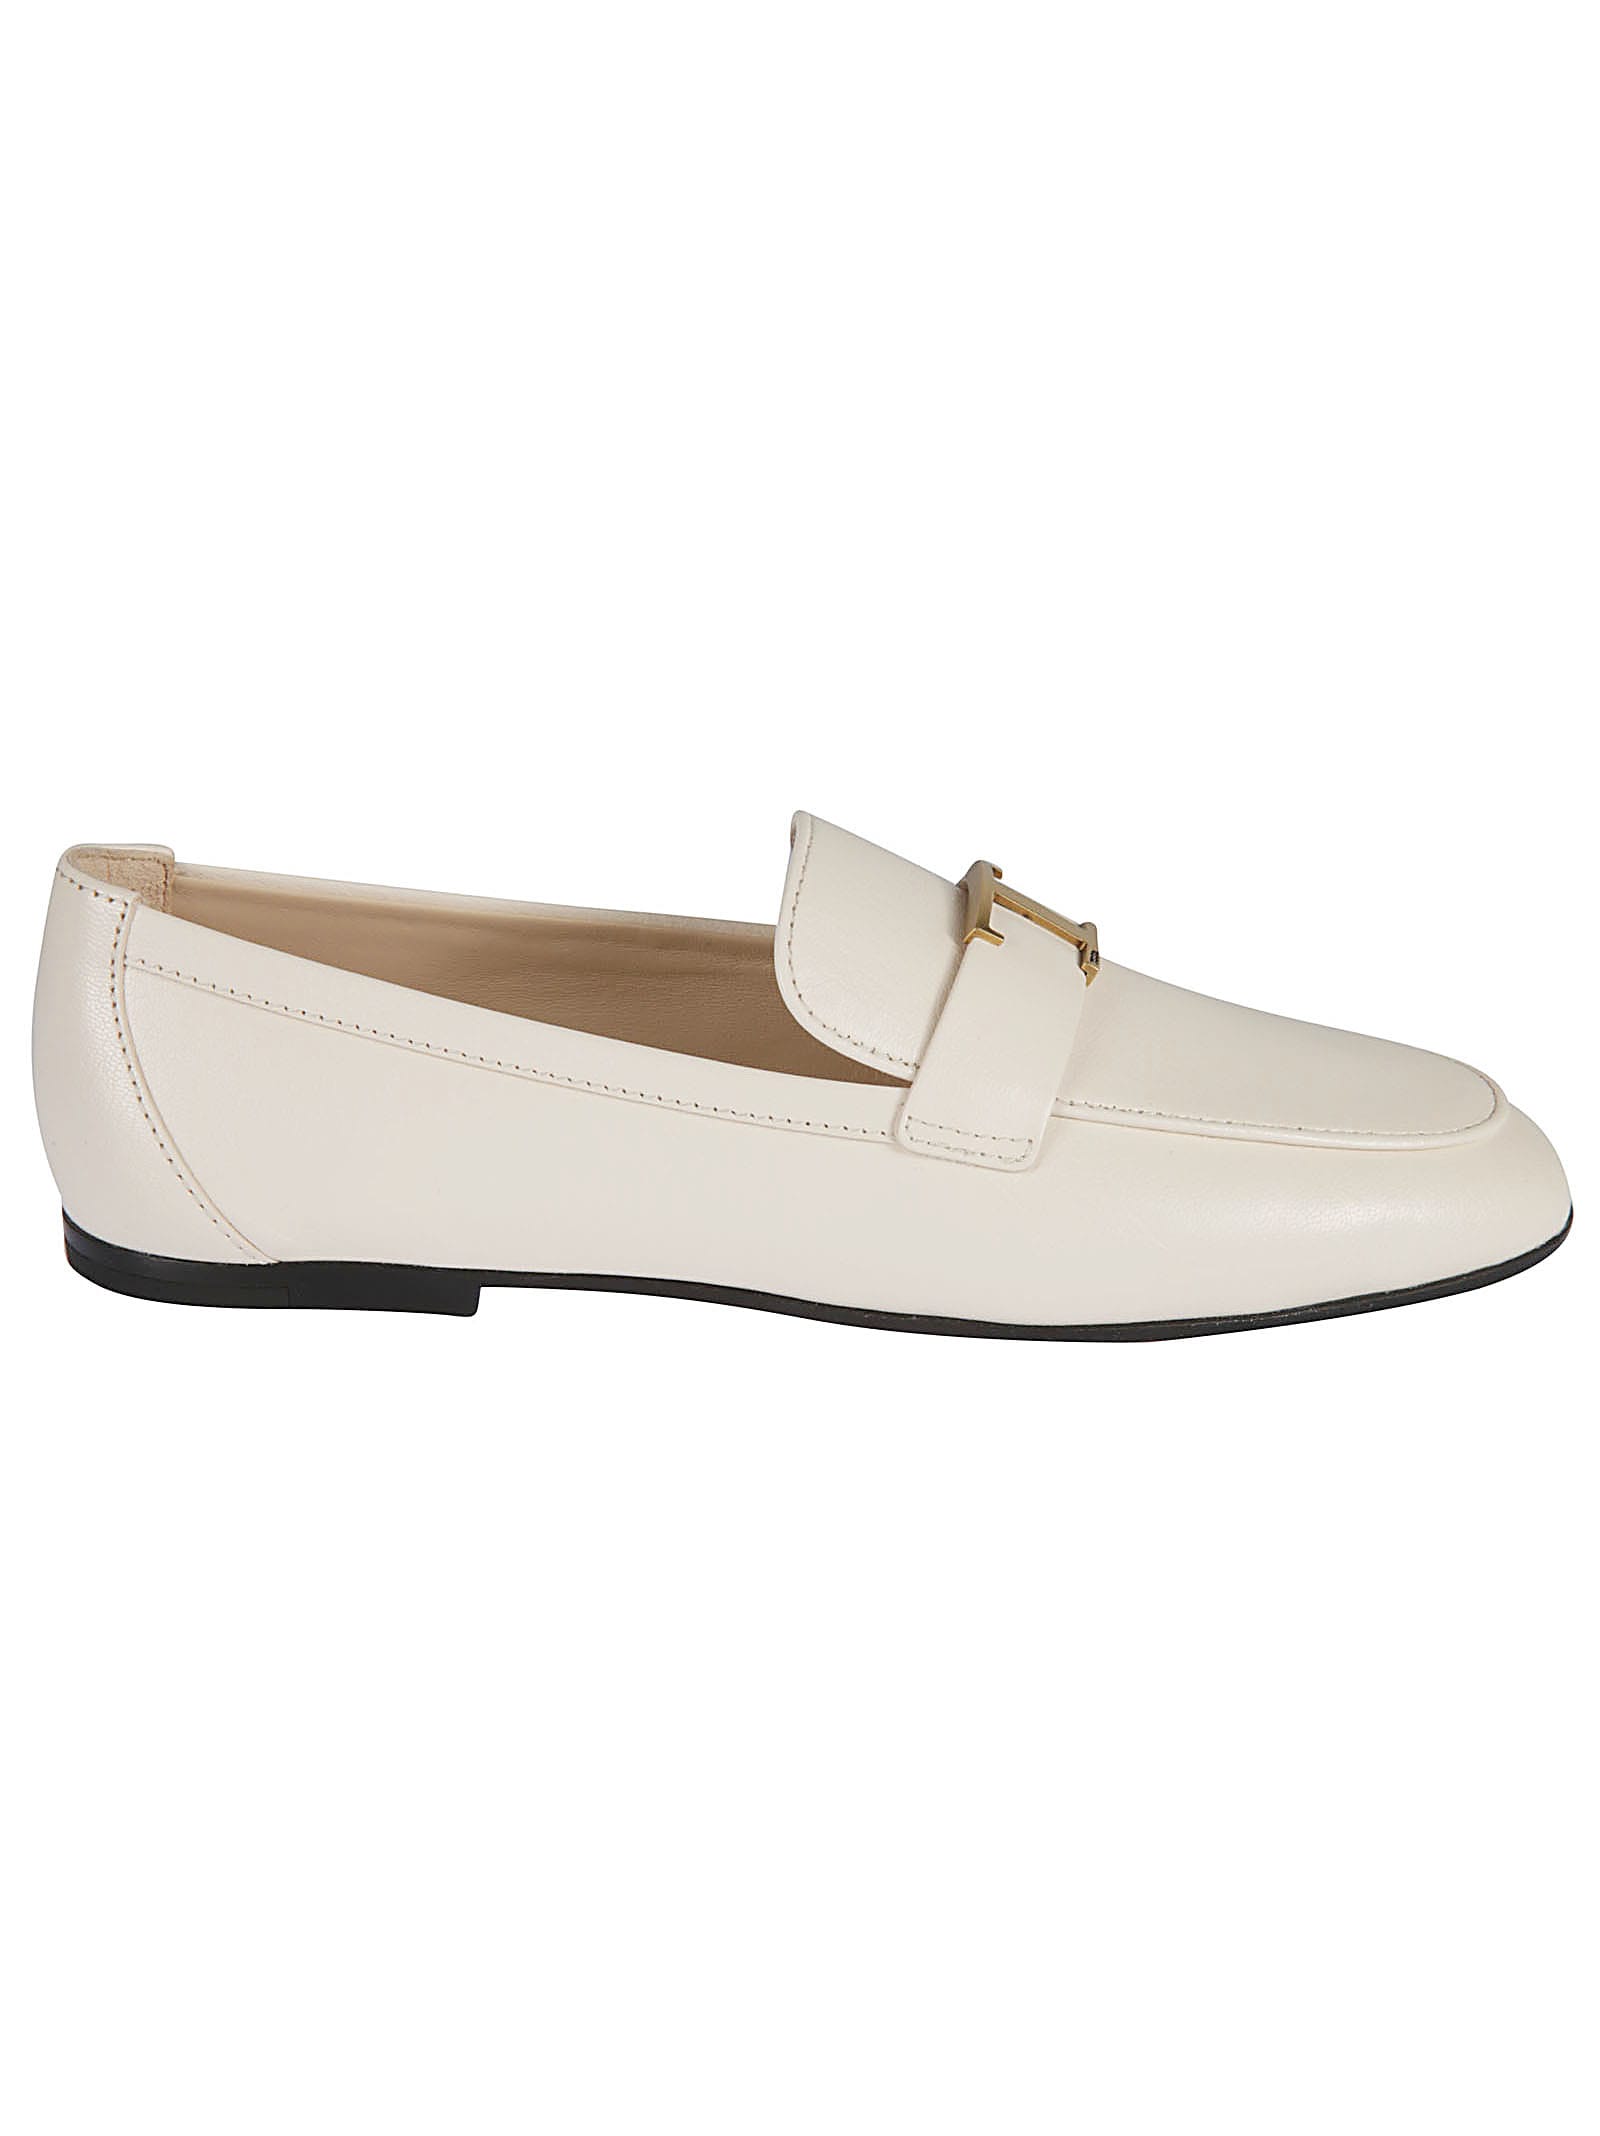 Tods New 35b Loafers